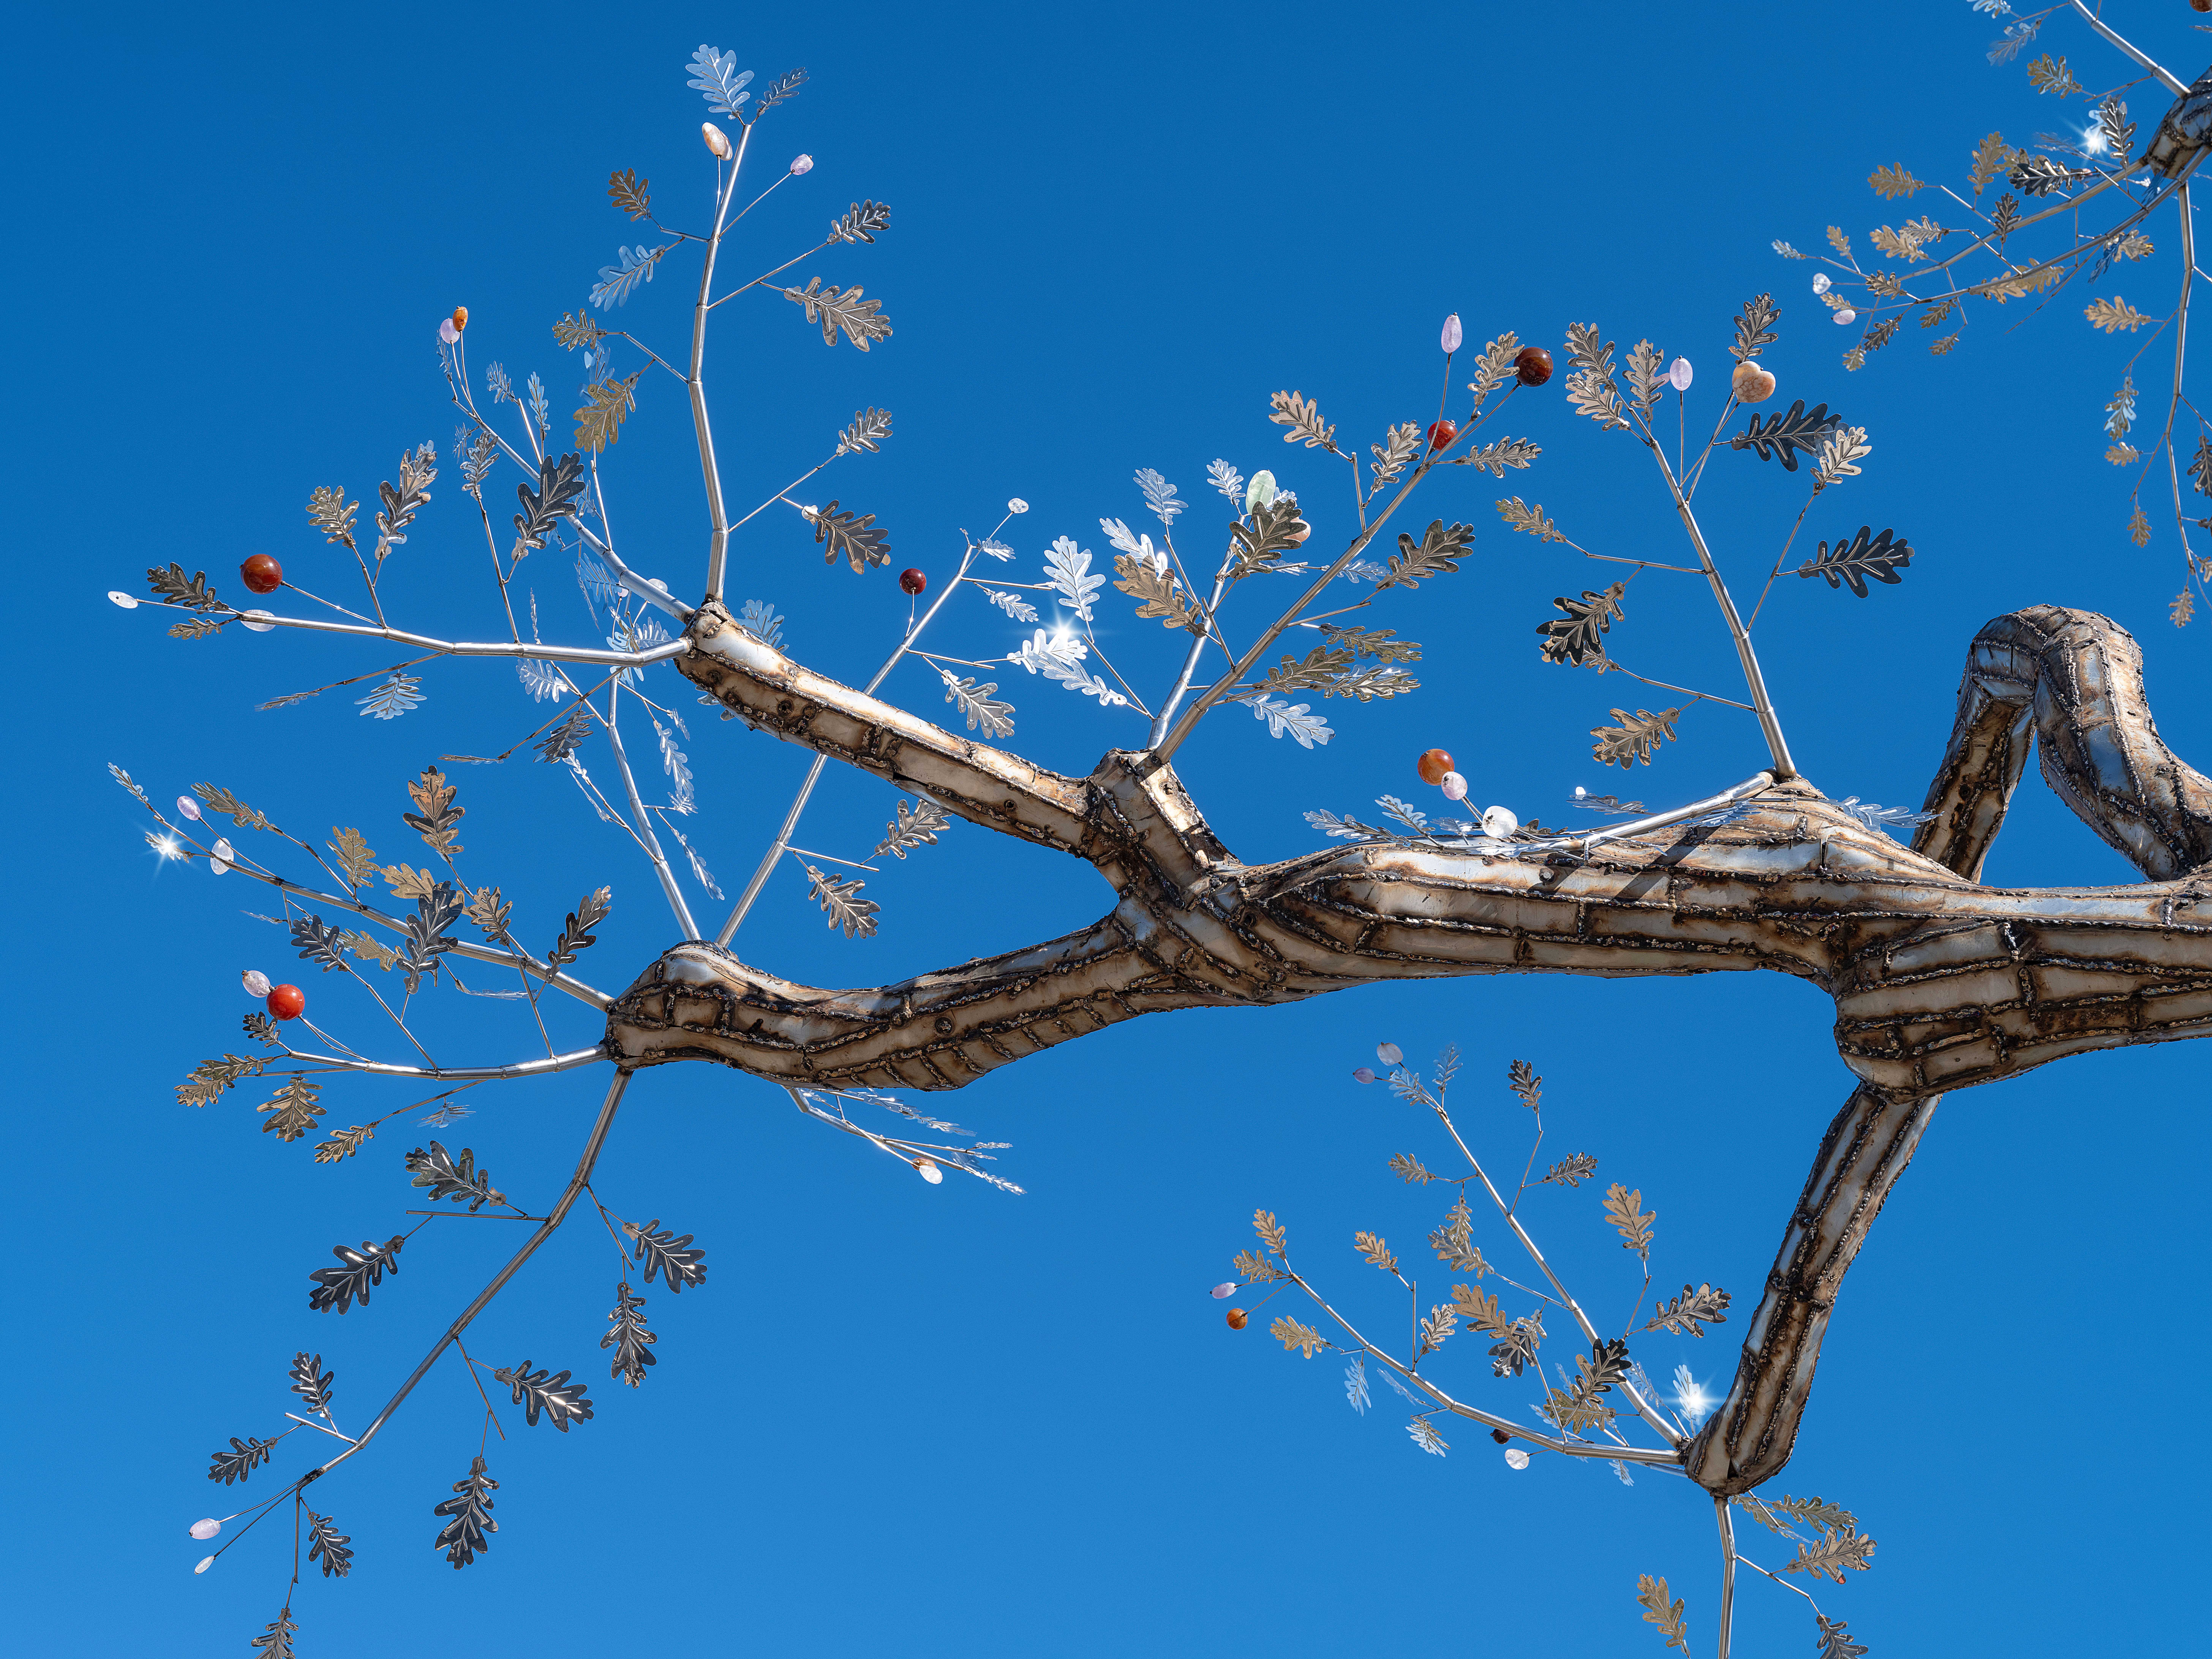 Stainless steel leaves hung on the branches of a dead oak tree. Photo: Supplied